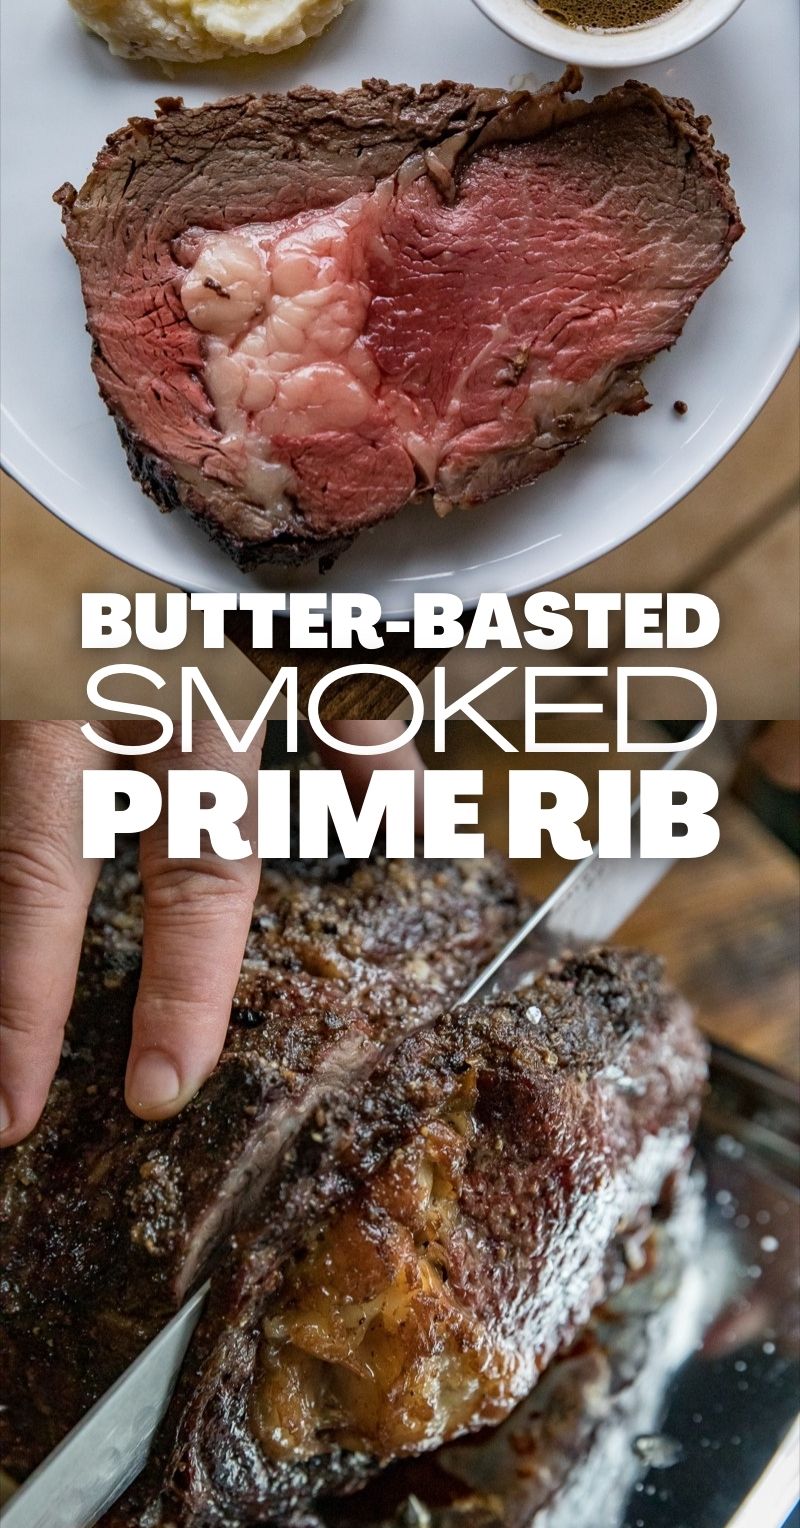 Procedure For Smoking a Prime Rib That Has Out Of This World Flavor!